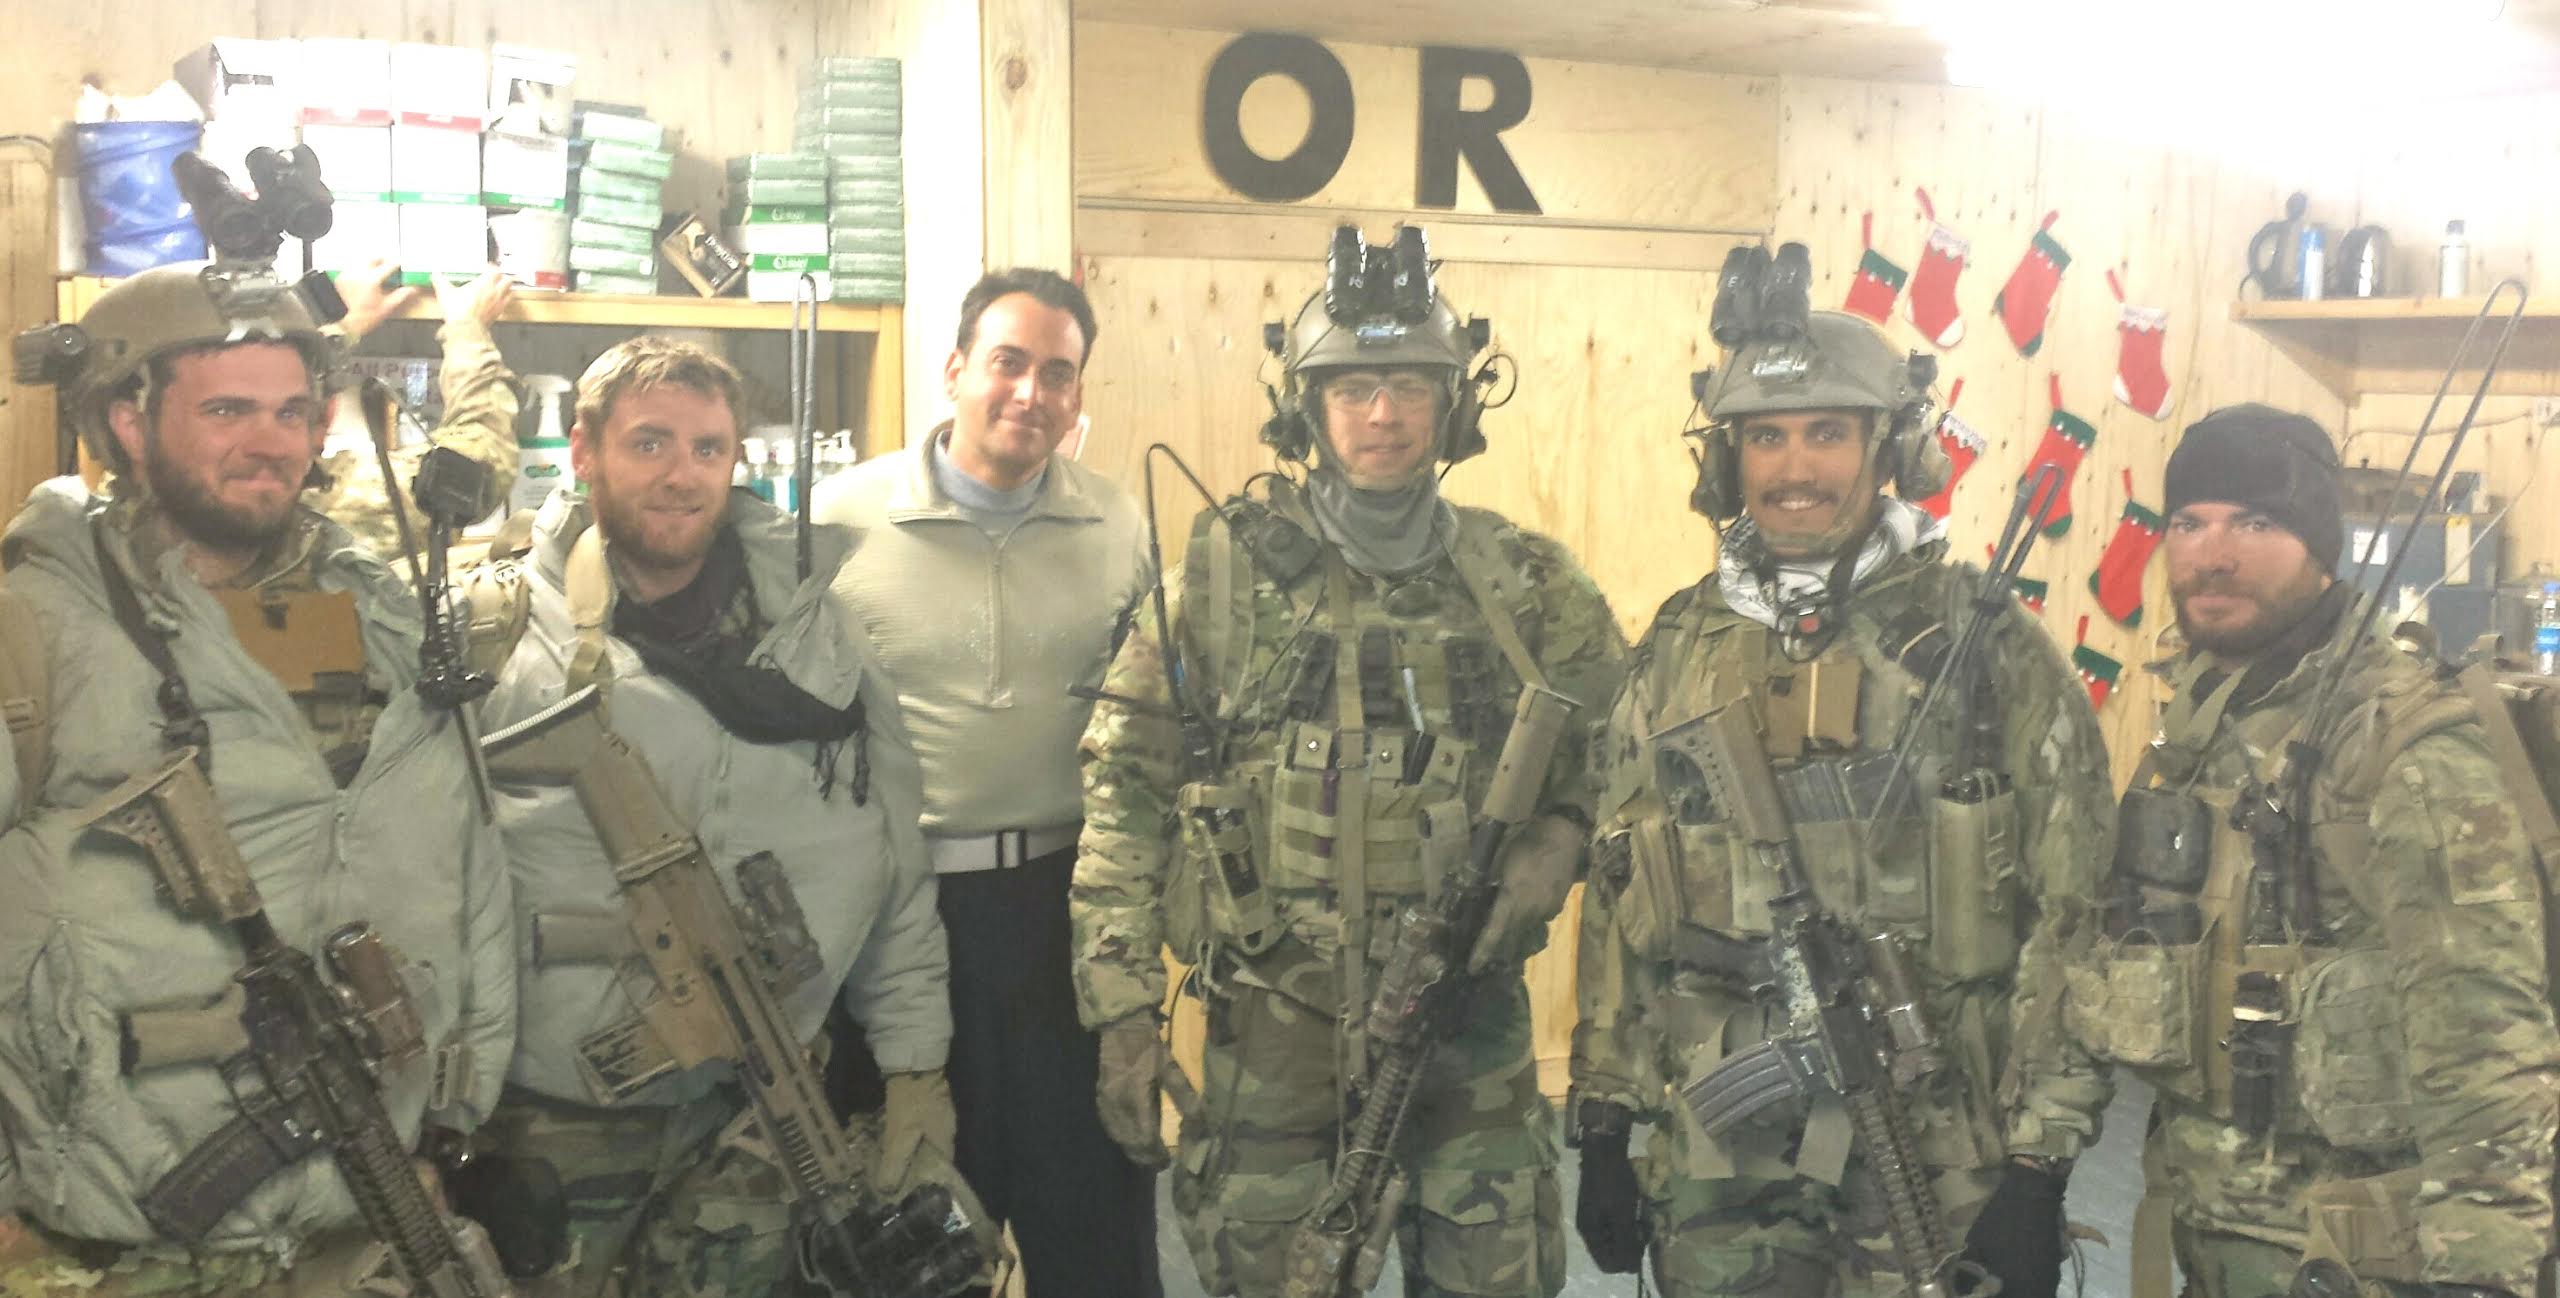 This Special Forces Team Brings In One Of Their Men After A Late-night Mission